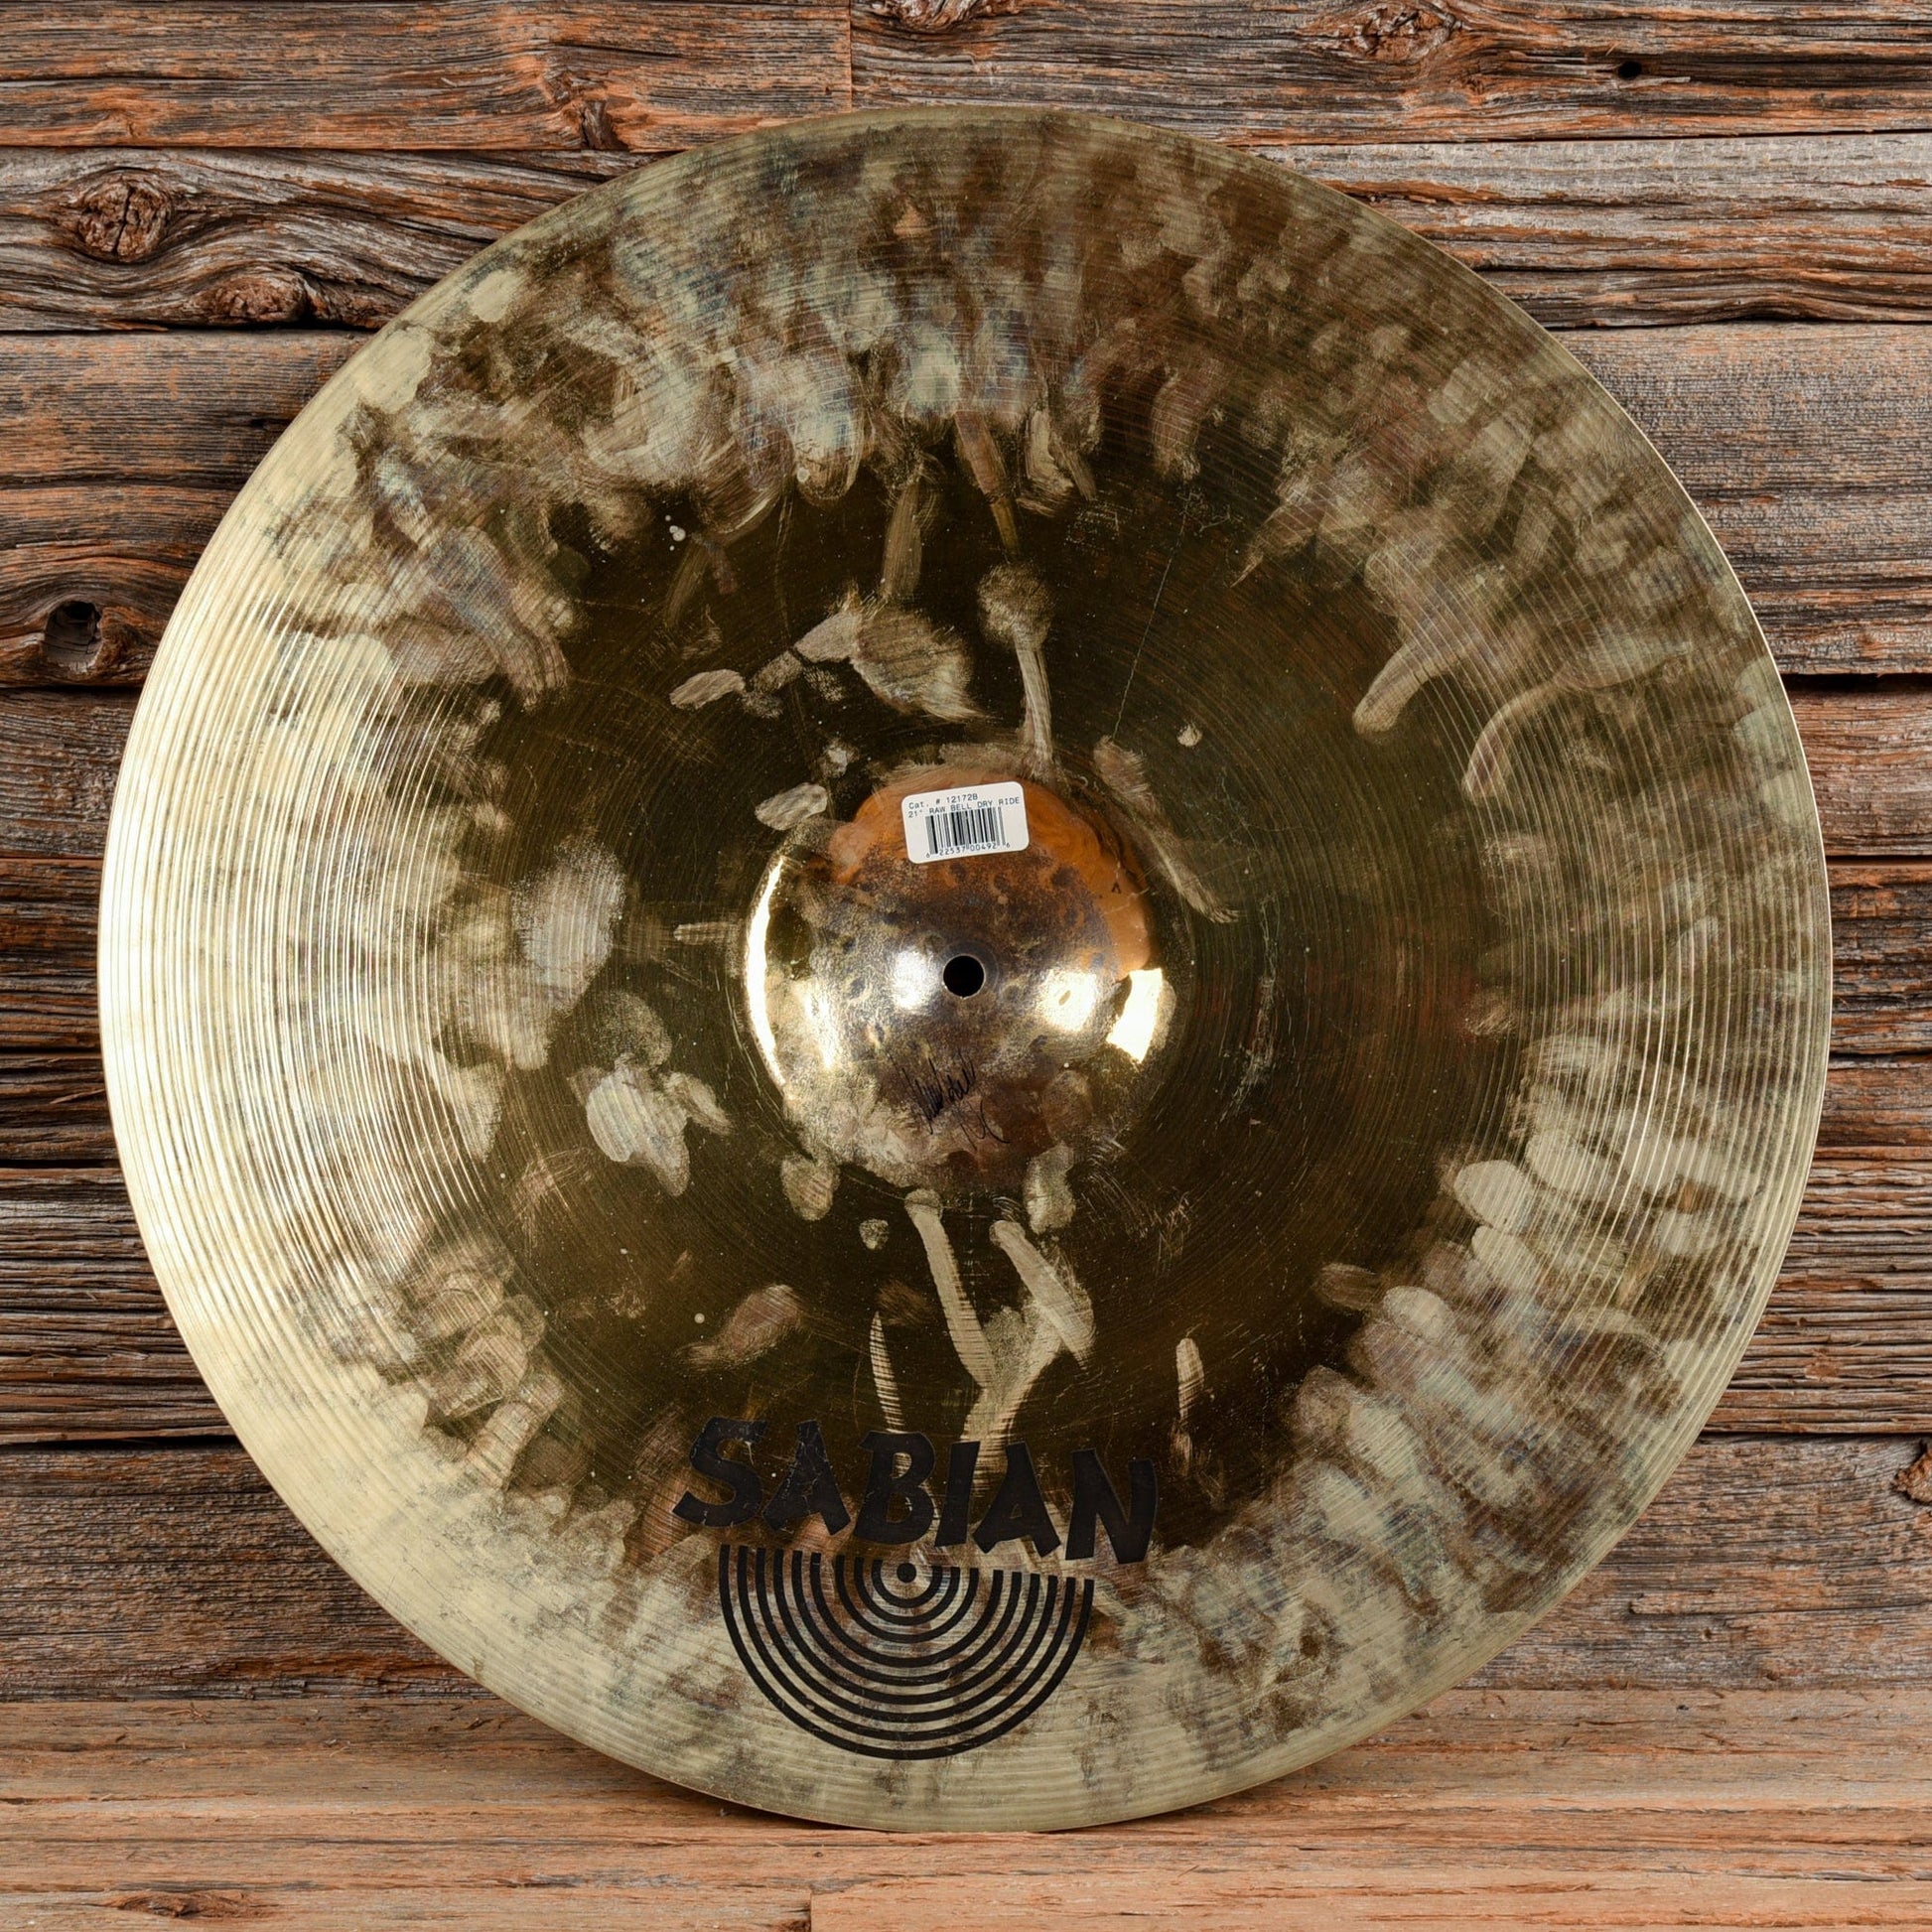 Sabian 21" Hand Hammered Raw Bell Dry Ride Cymbal USED Drums and Percussion